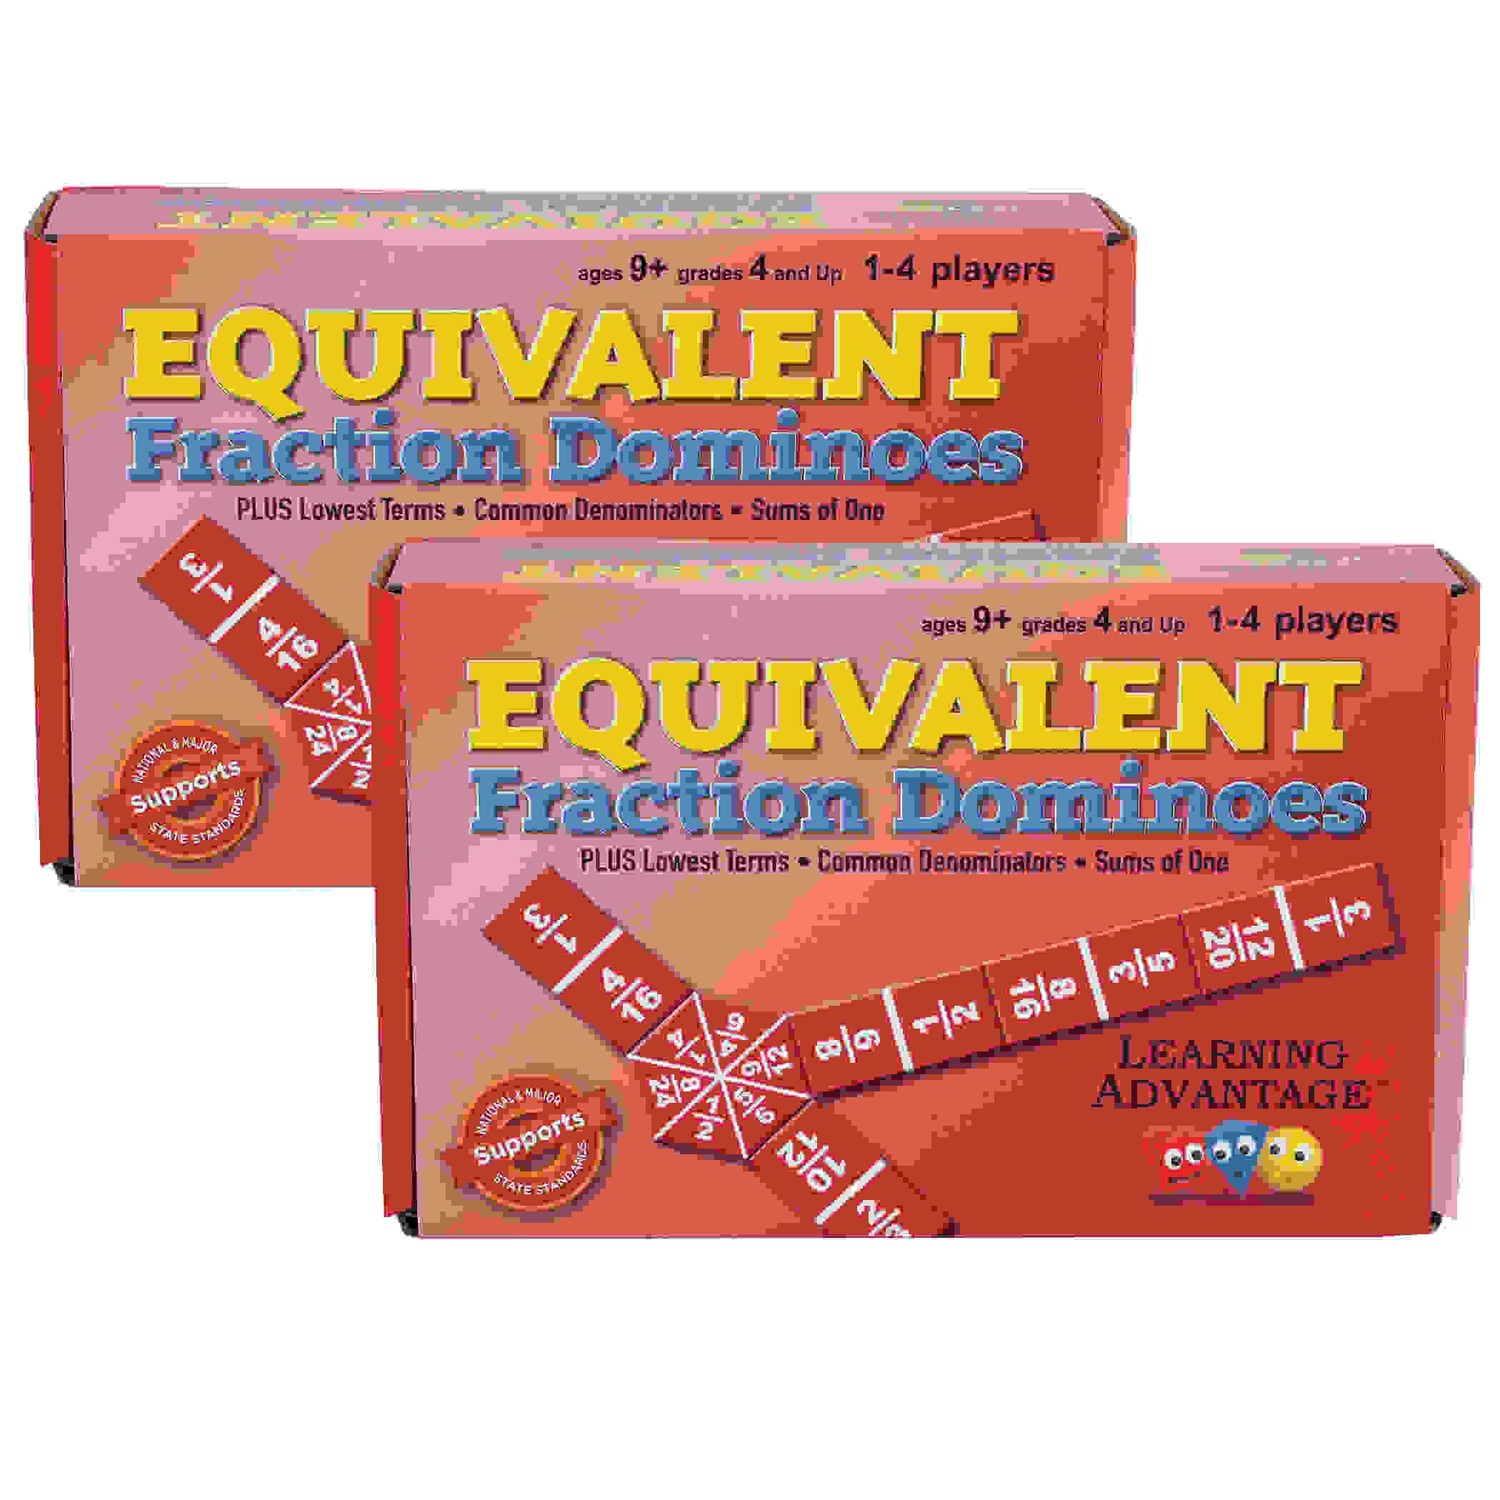 Equivalent Fraction Dominoes, Pack of 2